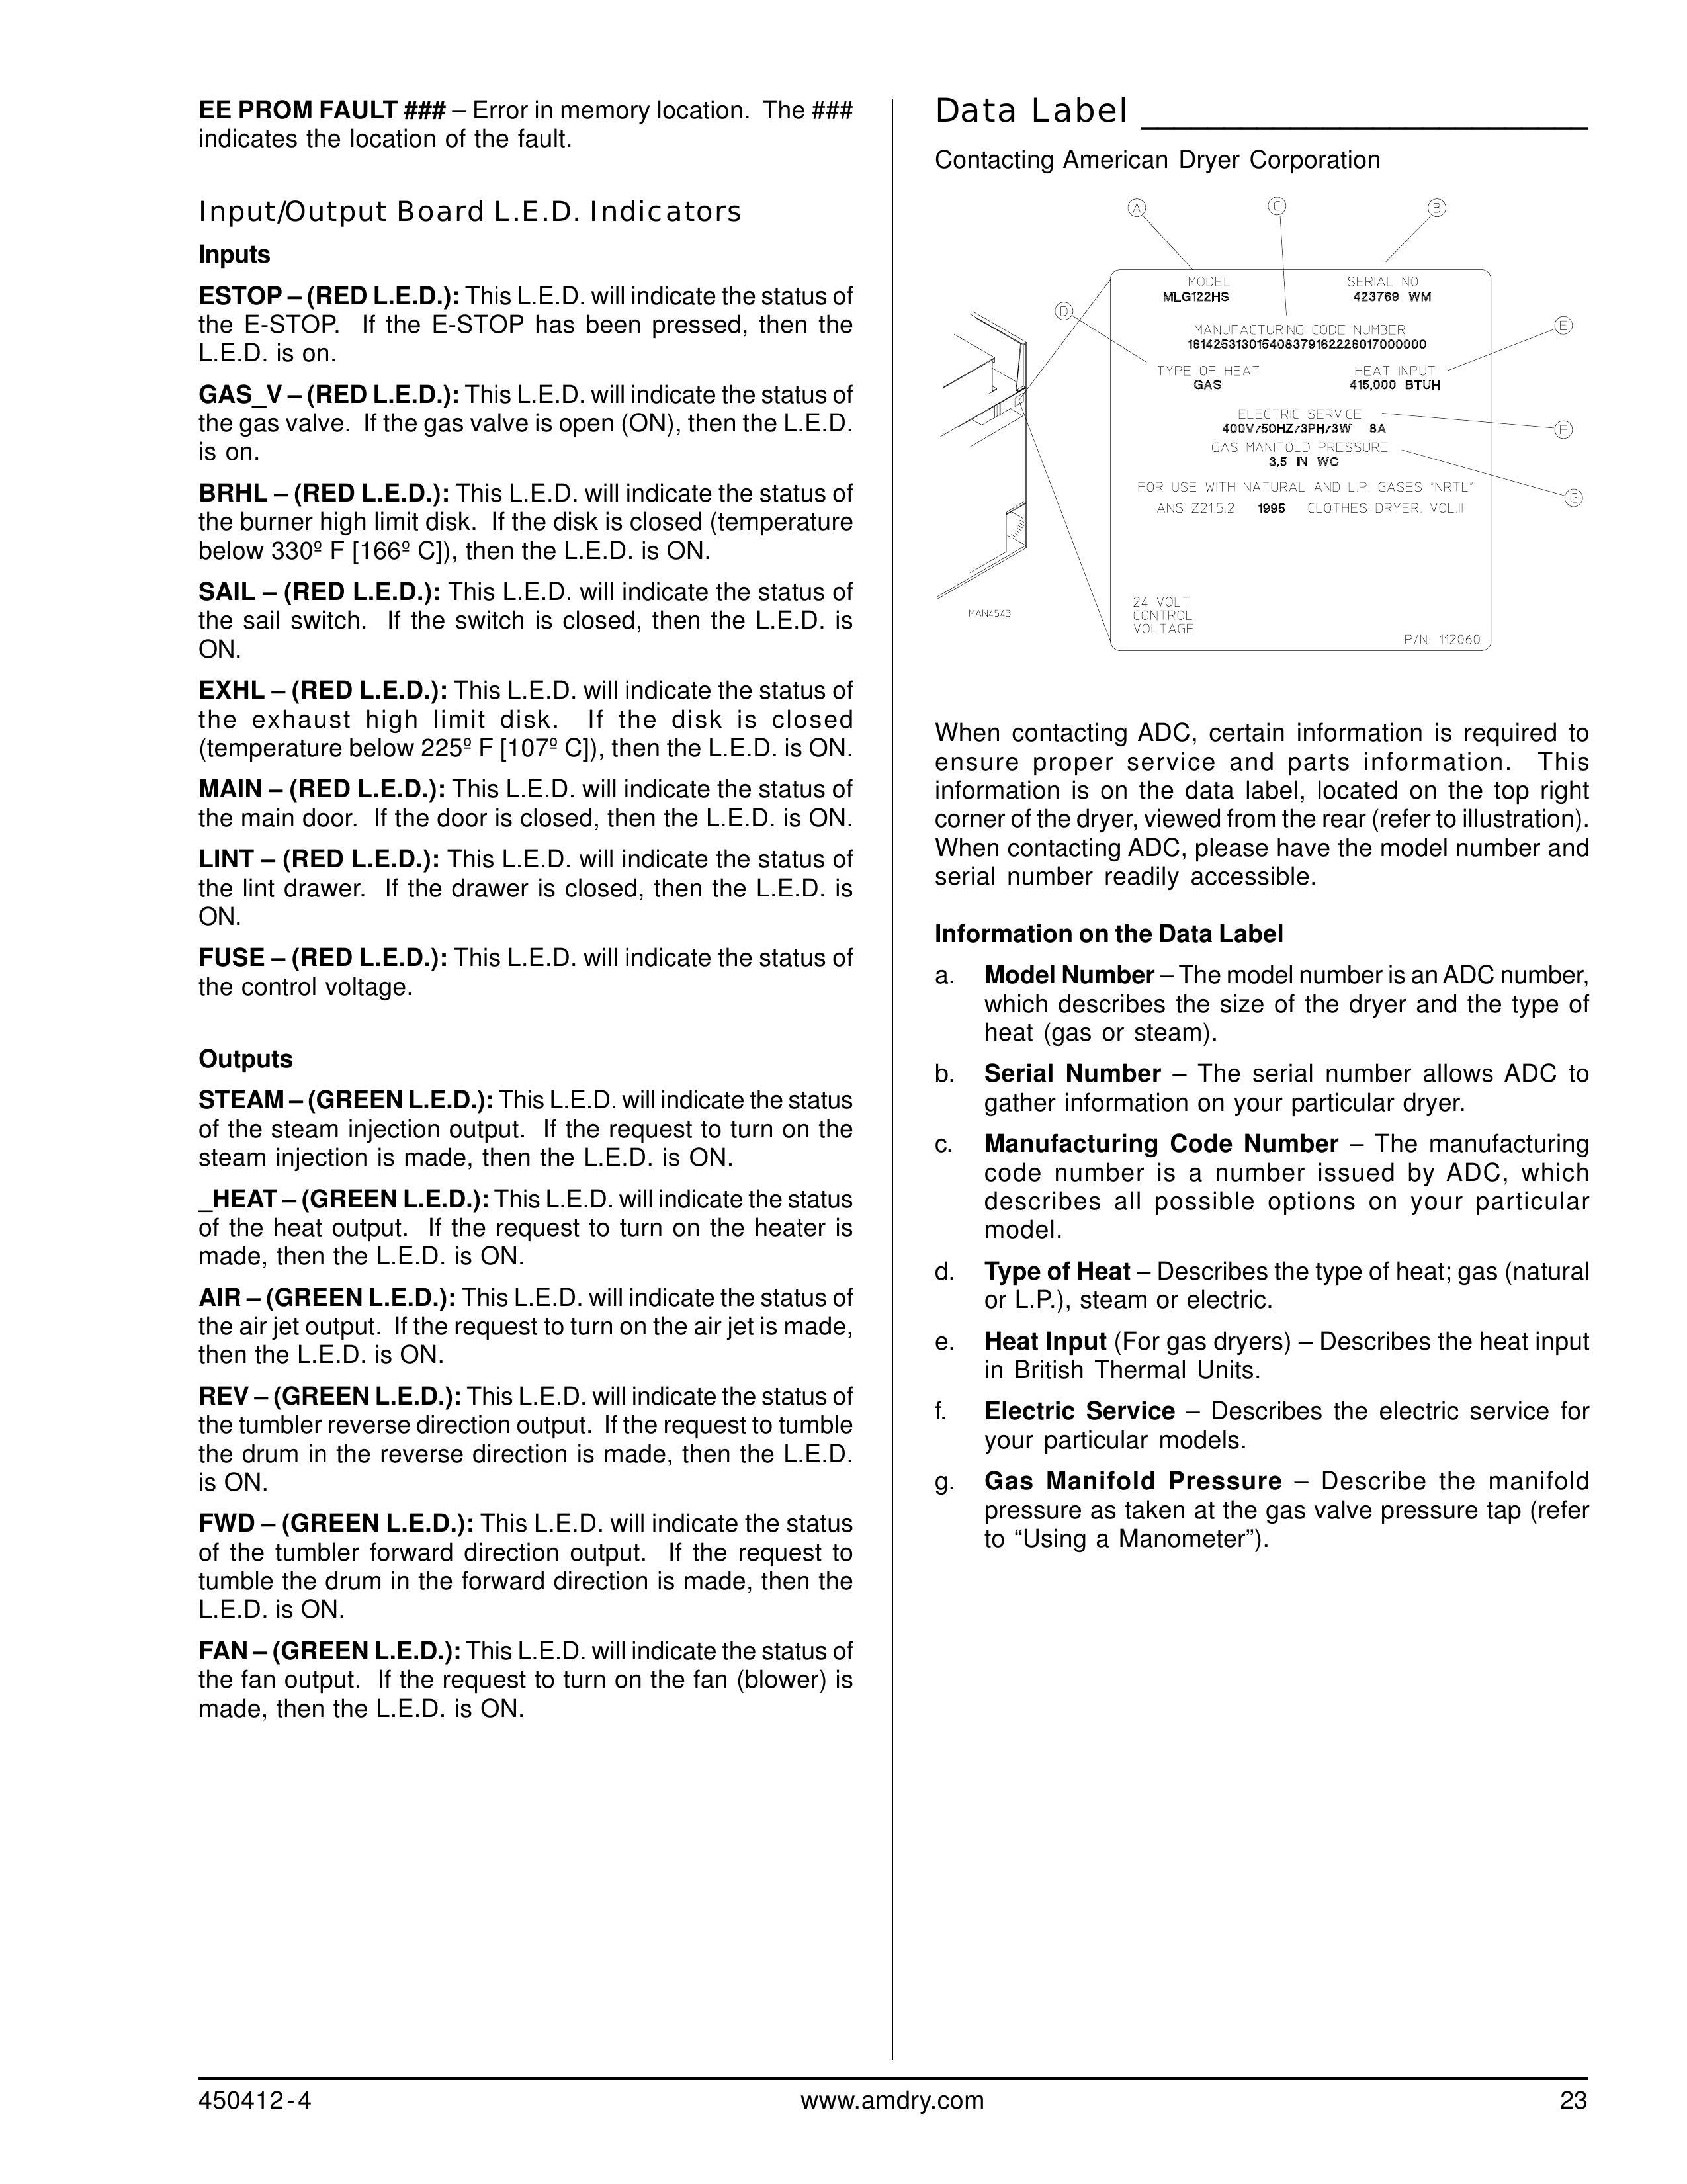 ADC ML-122 Clothes Dryer User Manual (Page 23)